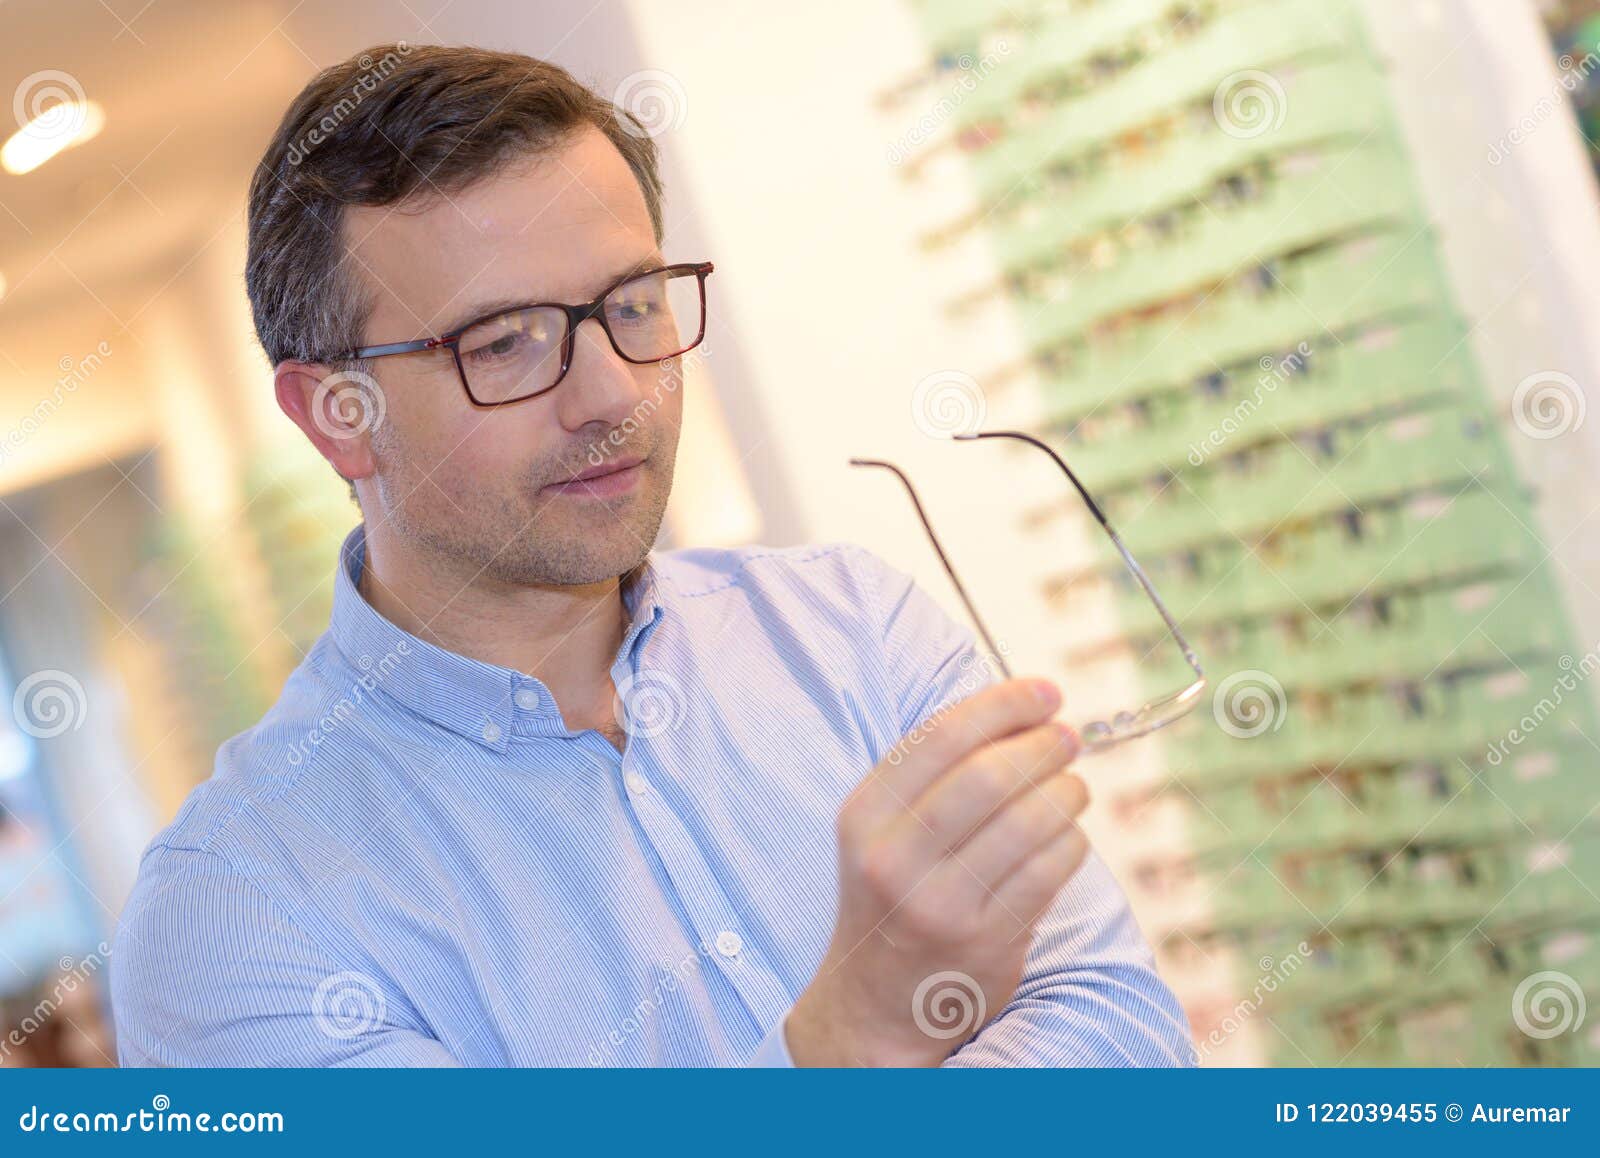 Optician Showing Glasses To Man at Optics Store Stock Image - Image of ...